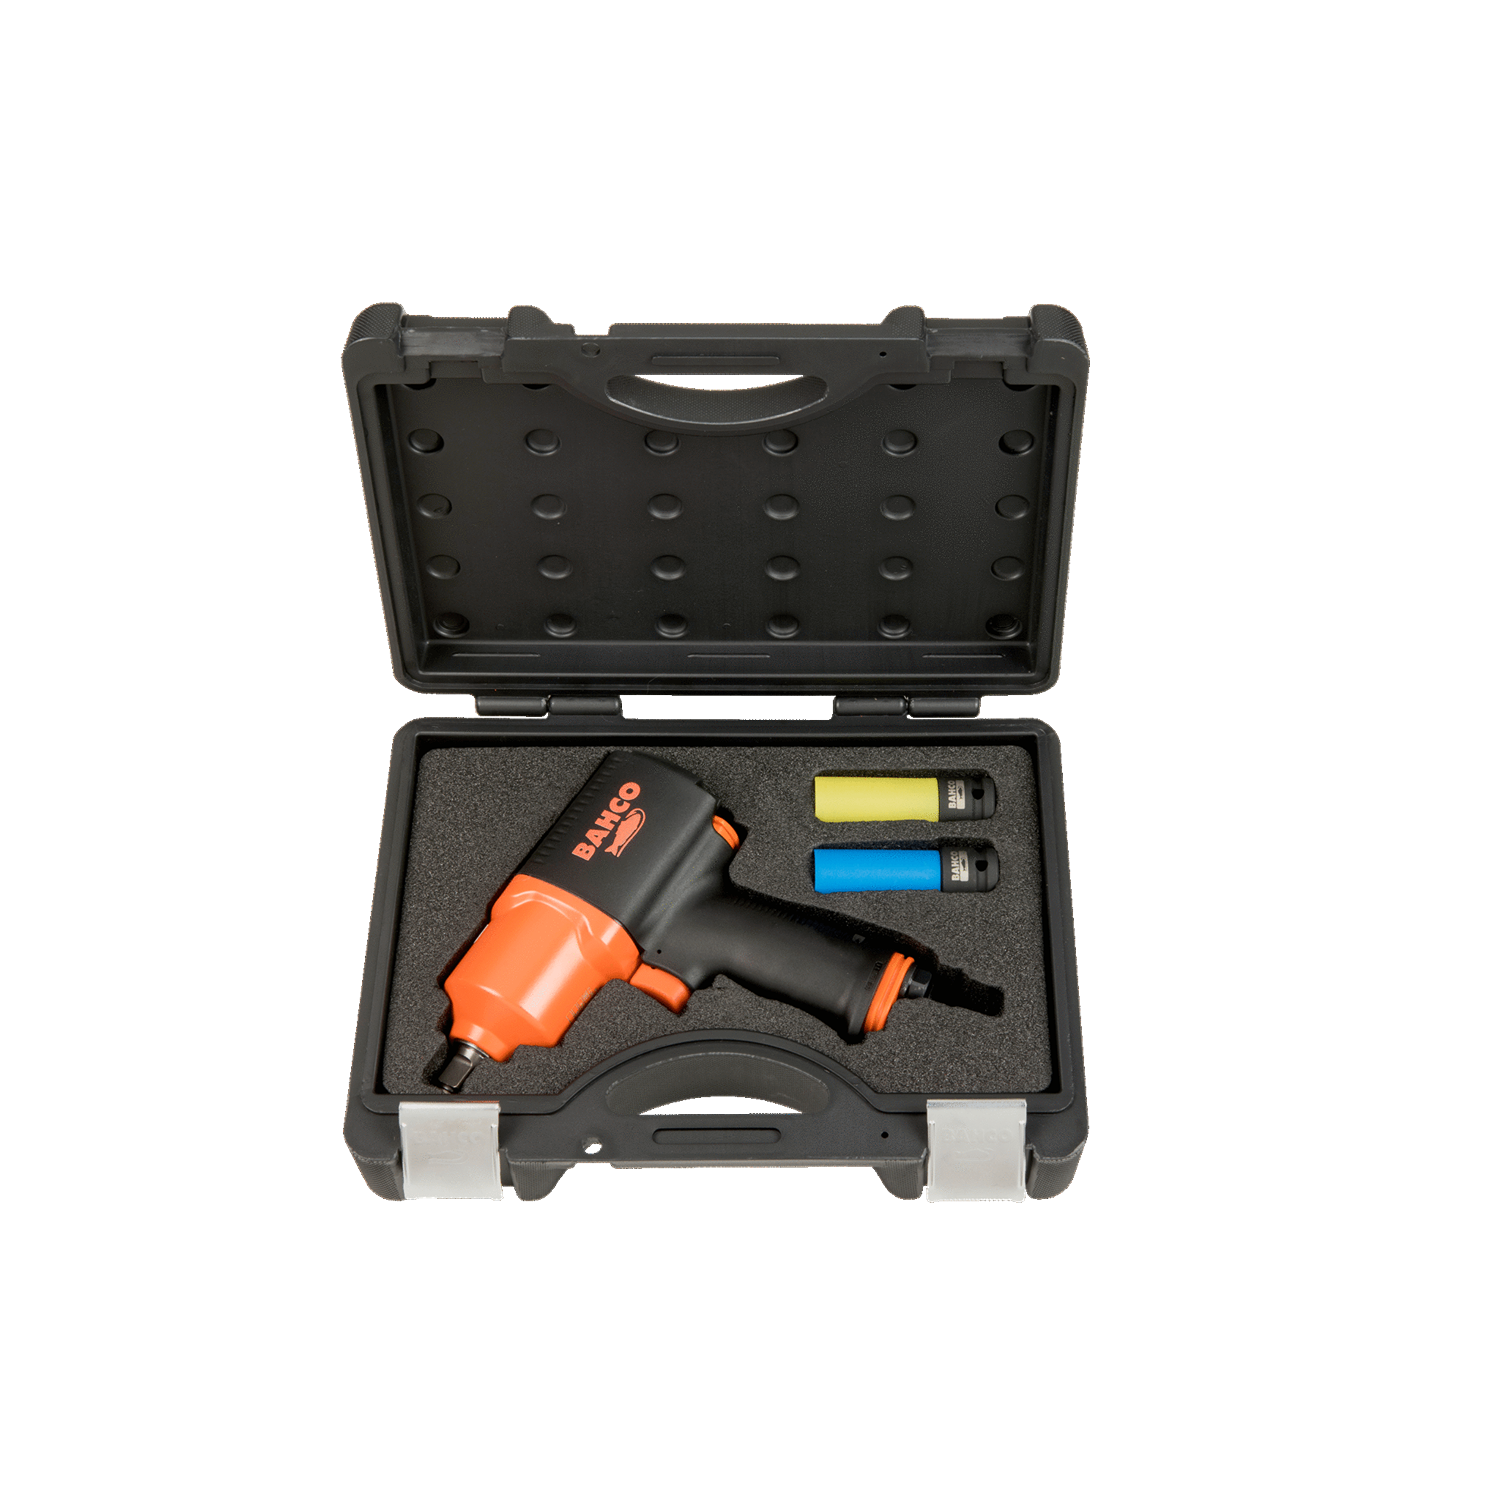 BAHCO BPC815K6 1/2" Impact Wrench Set with 2 Wheel Metric Sockets - Premium 1/2" Impact Wrench Set from BAHCO - Shop now at Yew Aik.